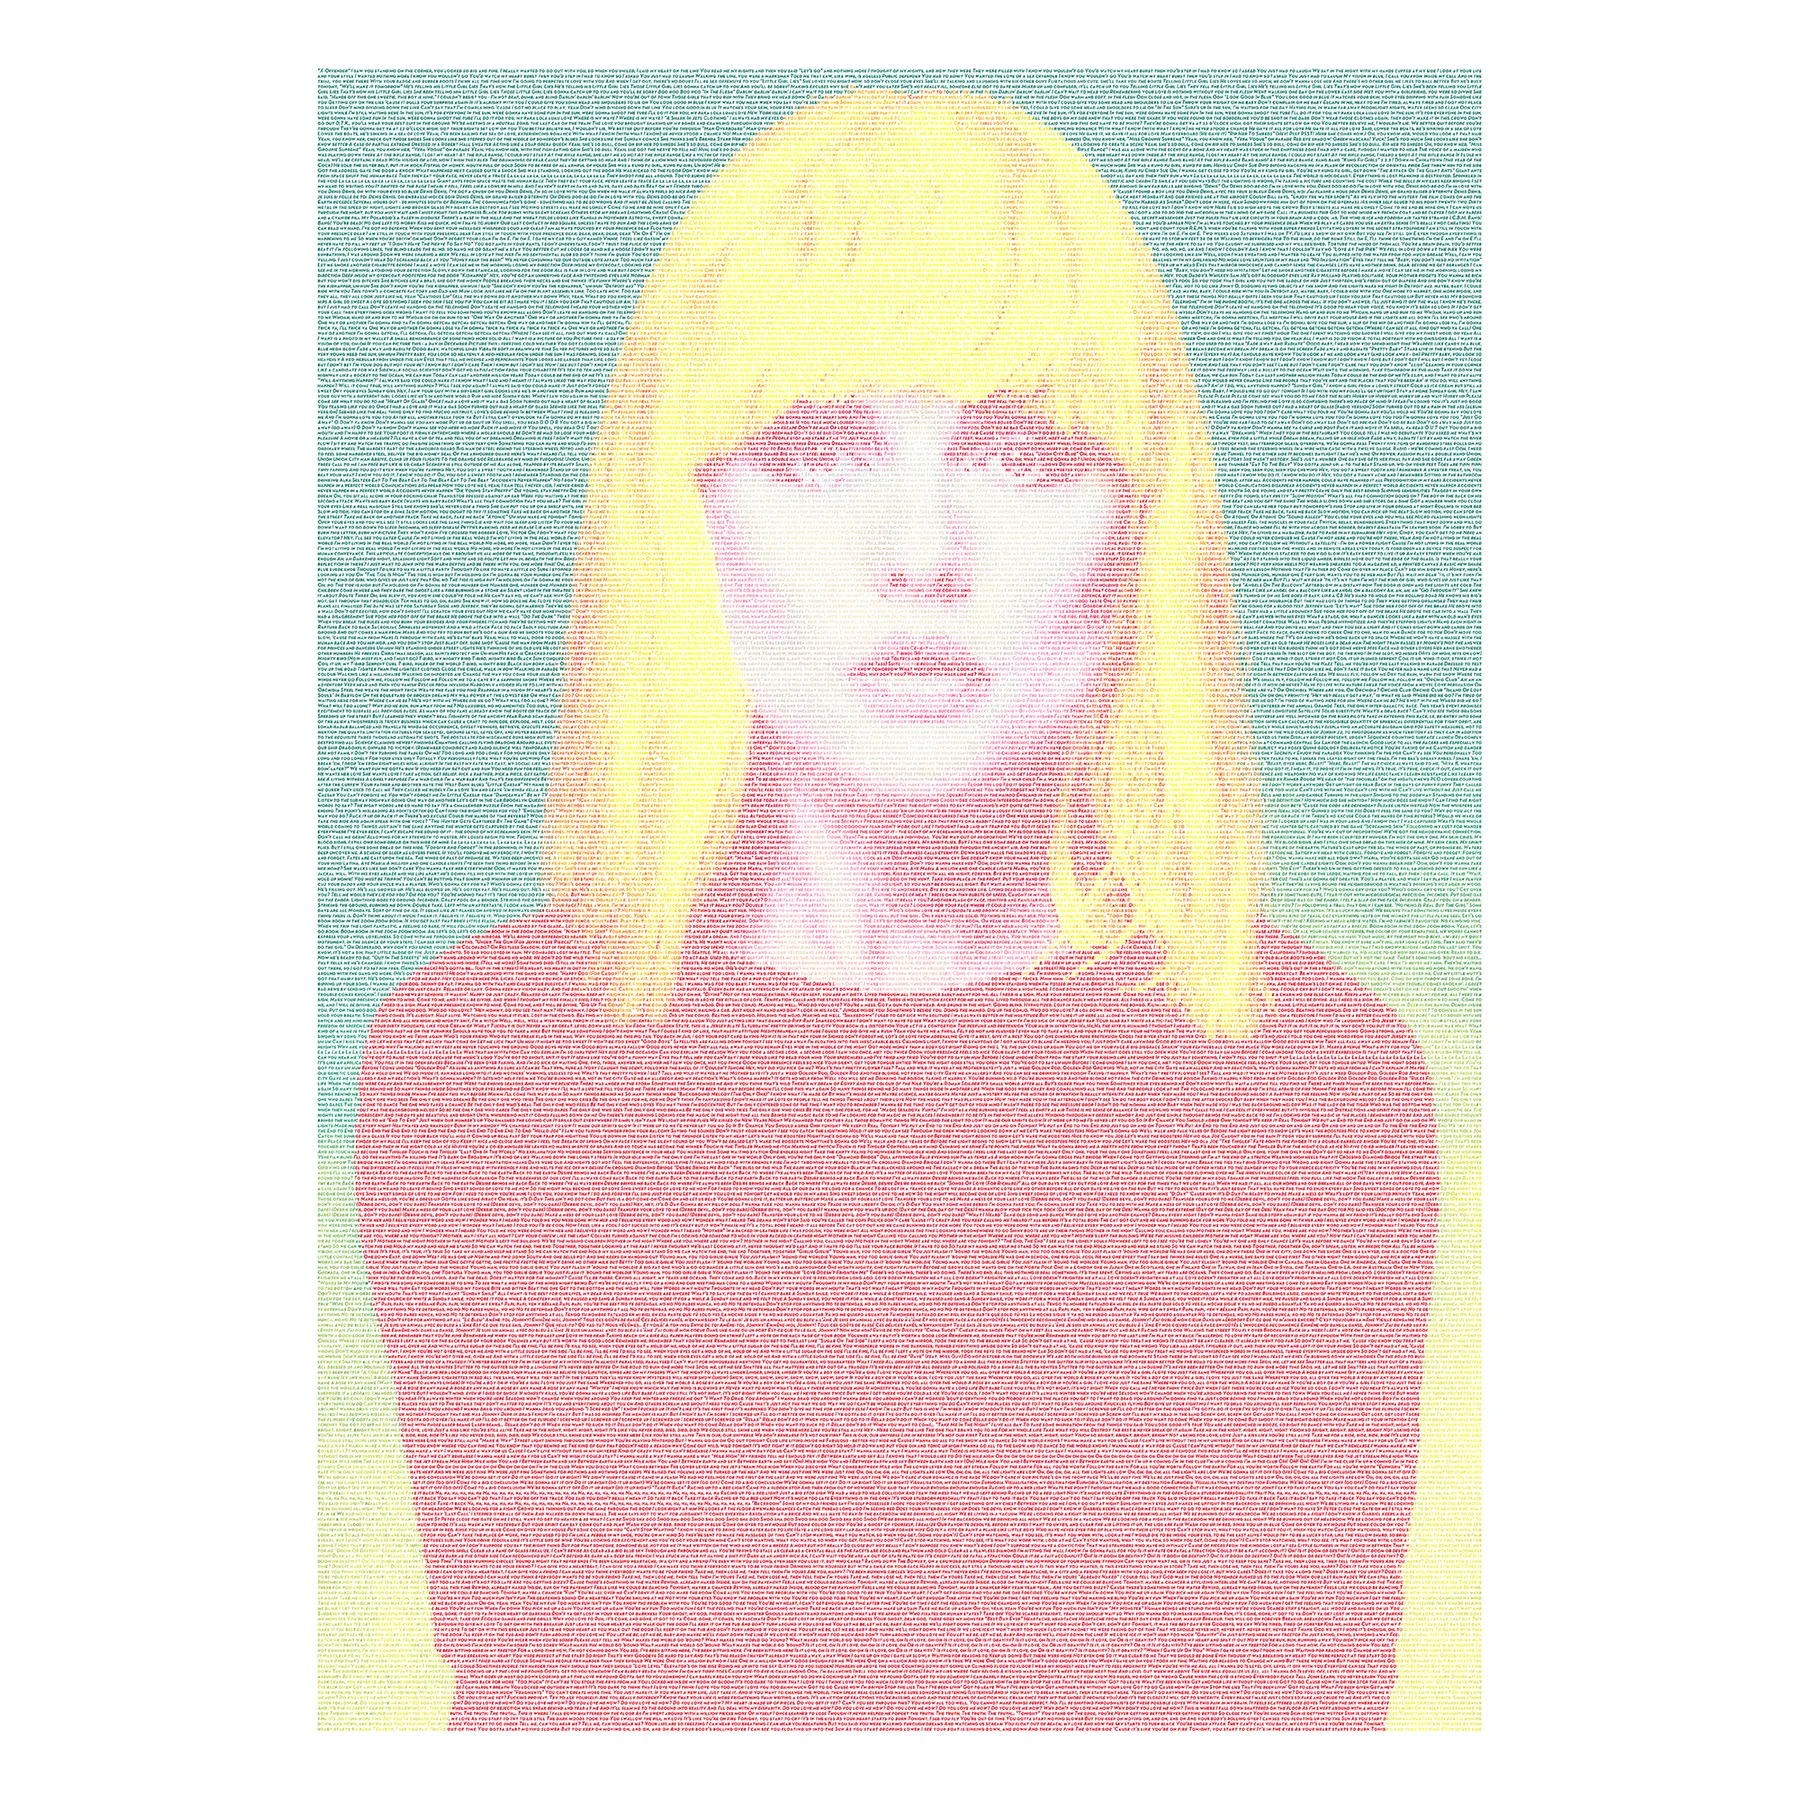 A red, green and yellow typographic portrait of Debbie Harry, created form Blondie lyrics.